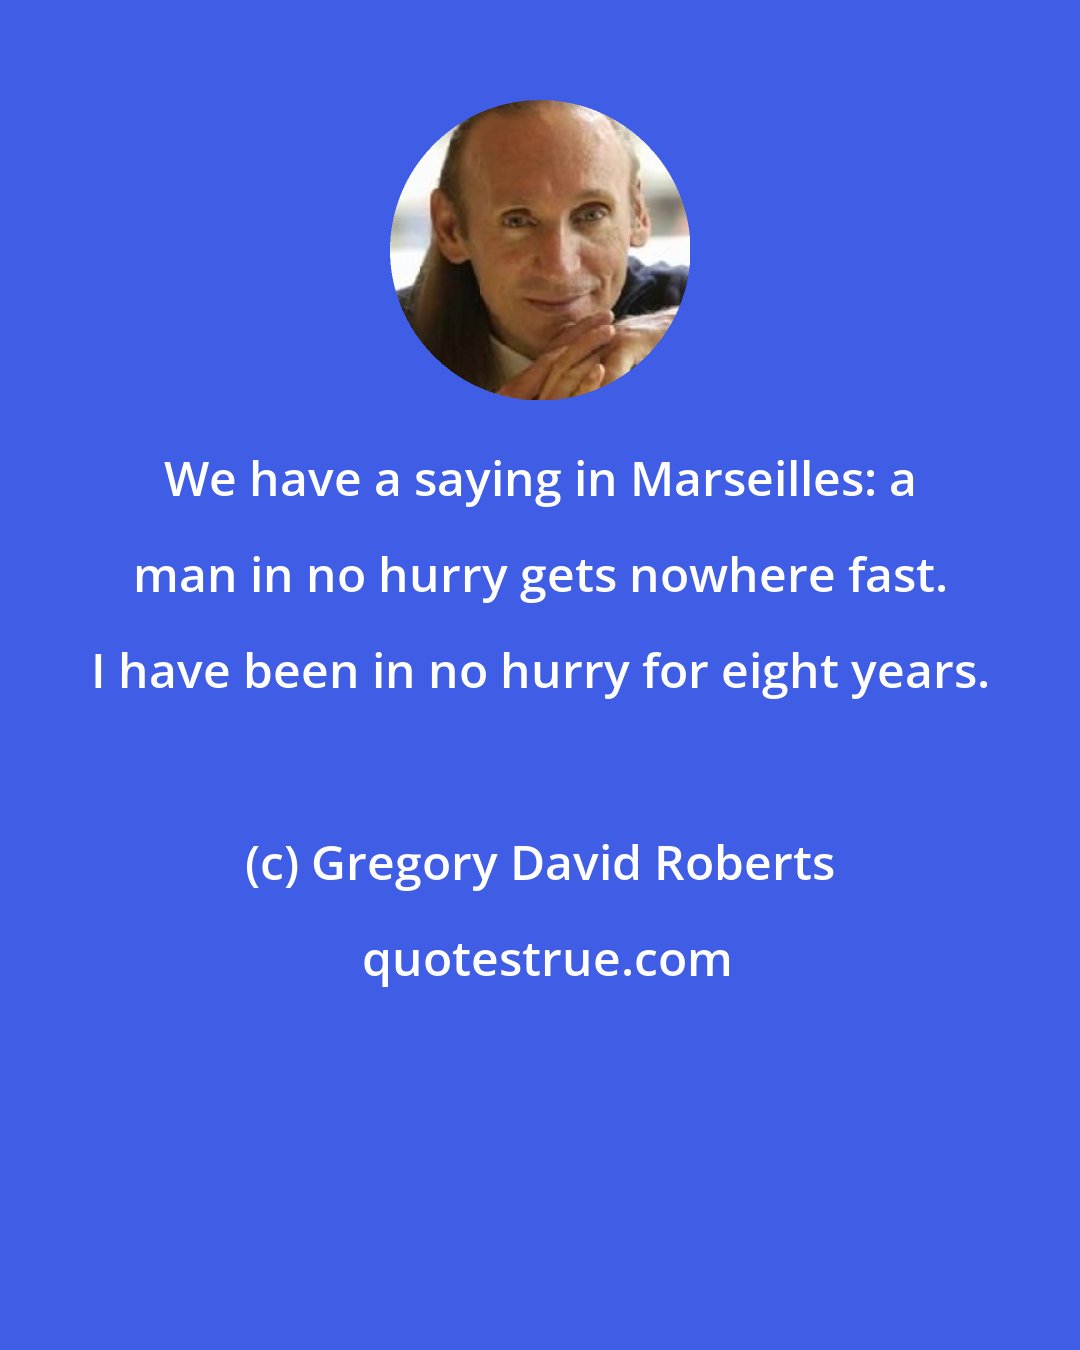 Gregory David Roberts: We have a saying in Marseilles: a man in no hurry gets nowhere fast. I have been in no hurry for eight years.